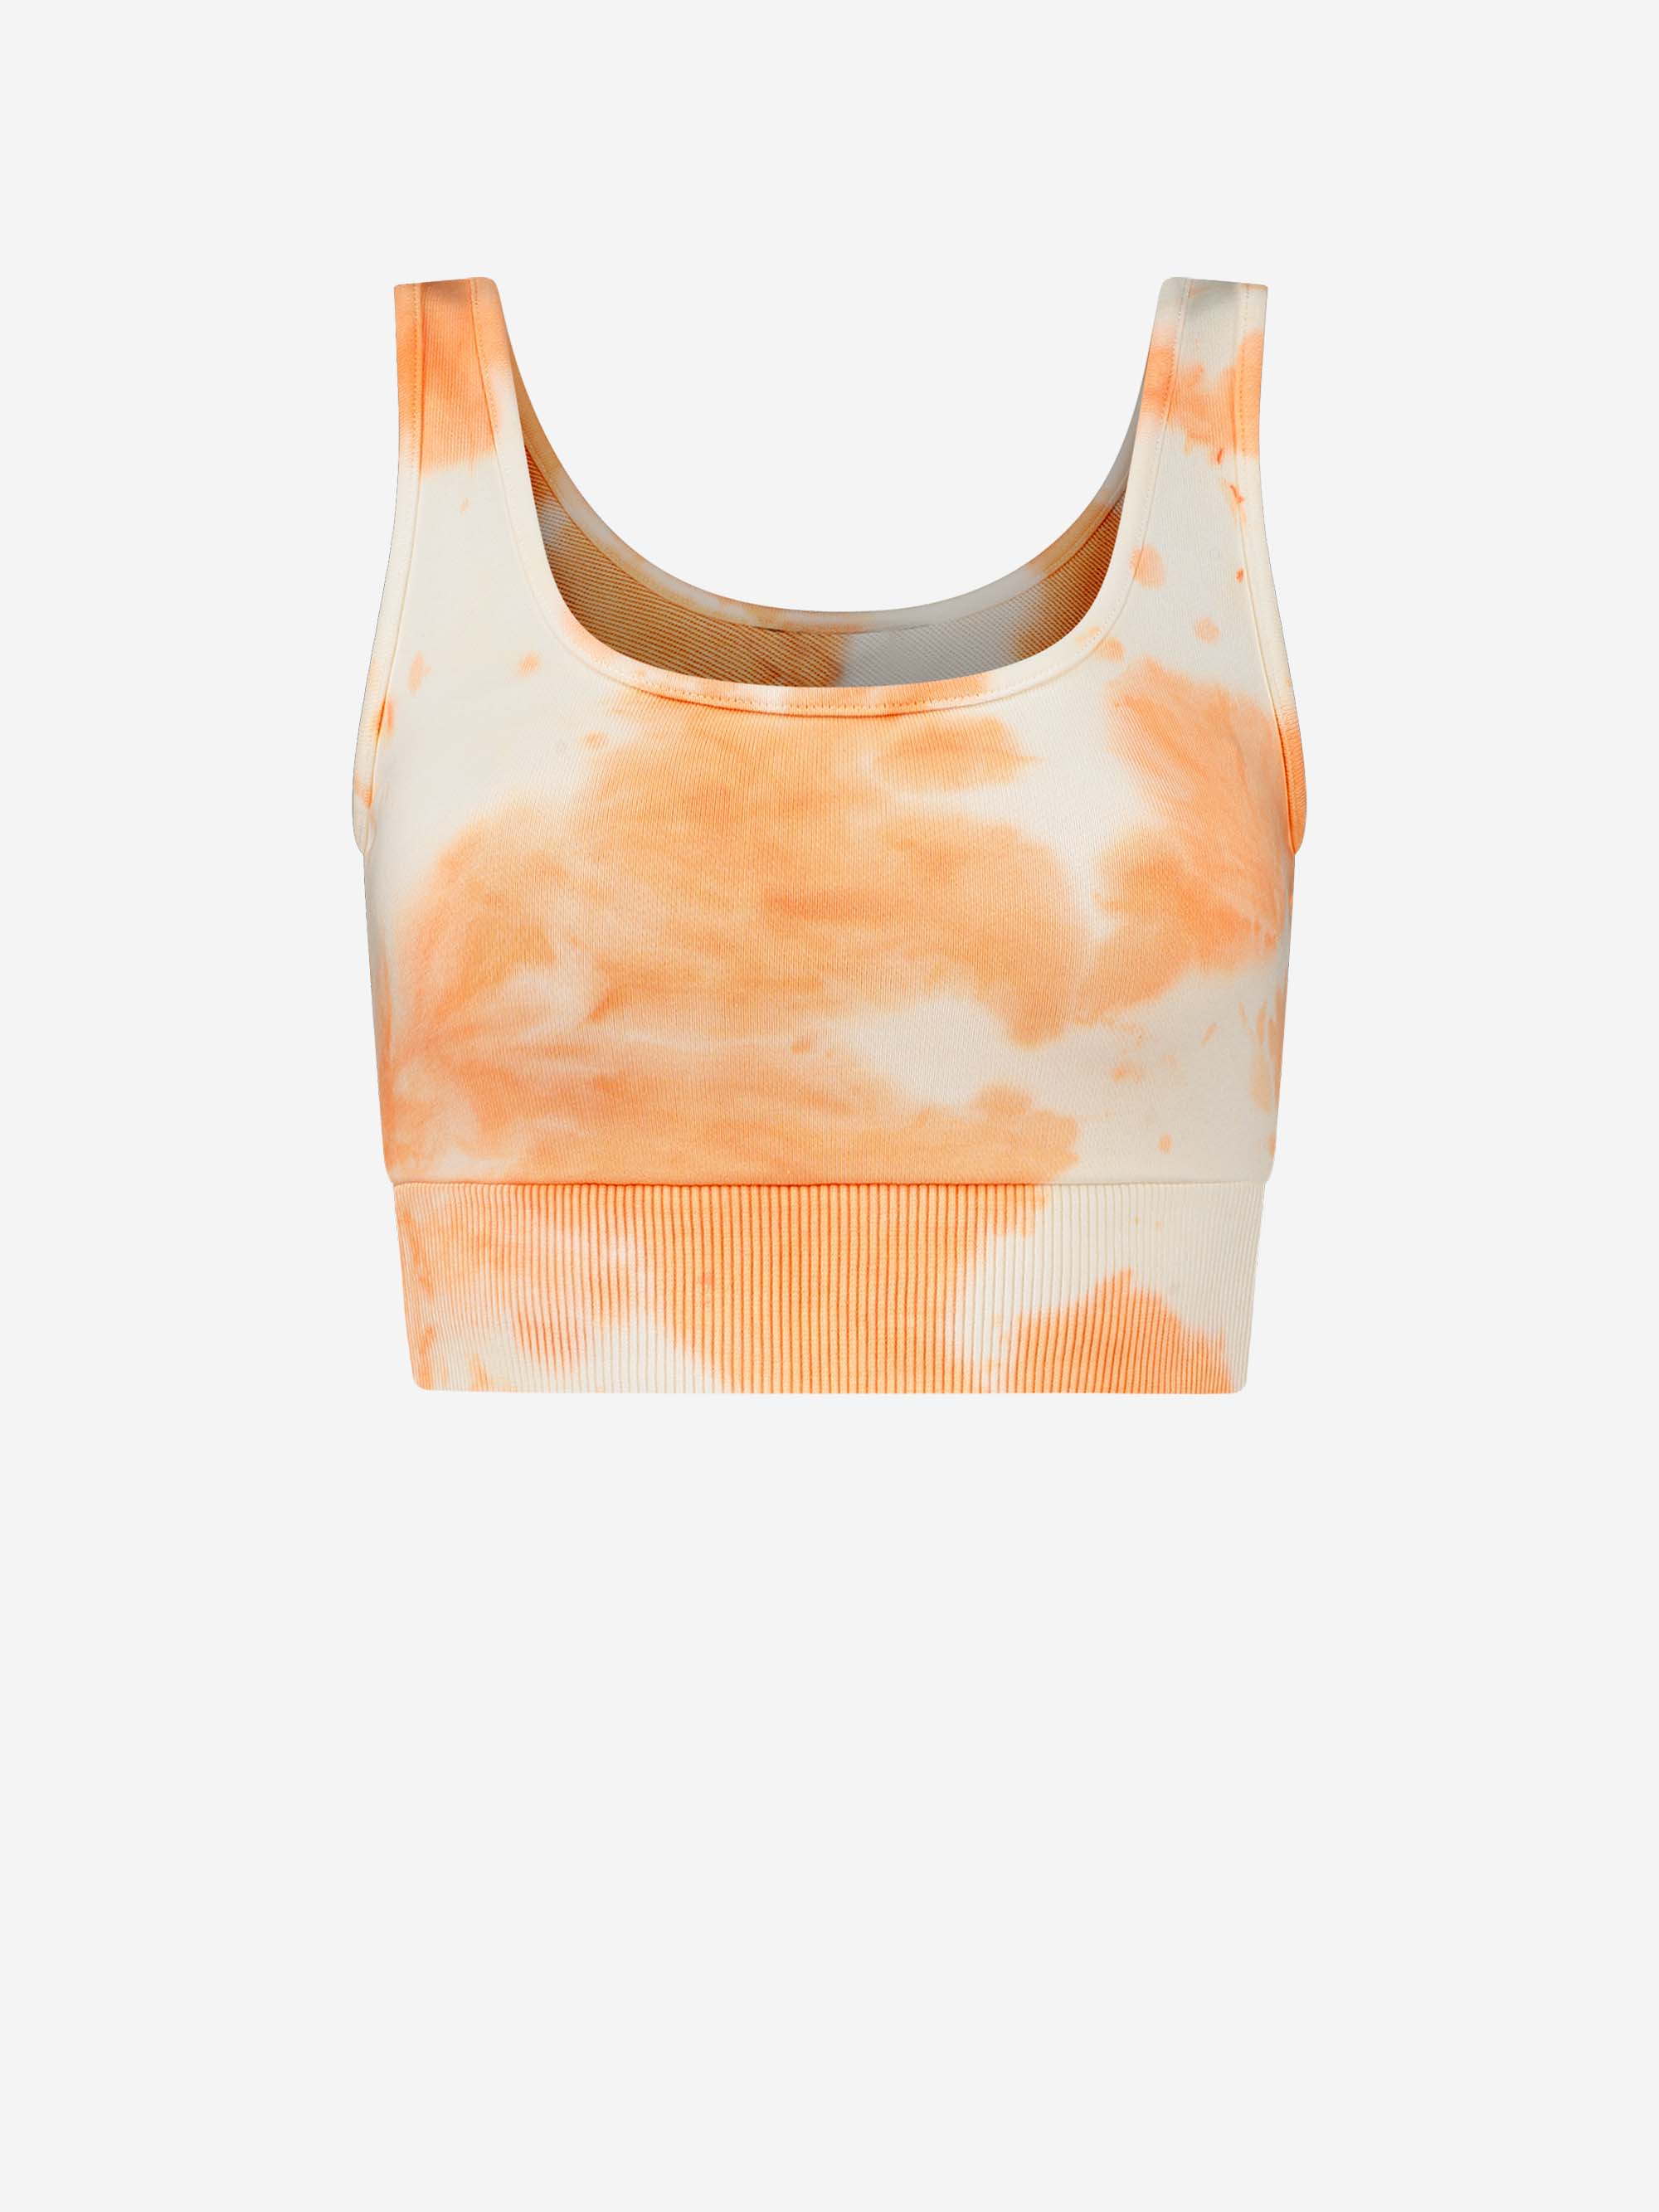 Short fitted top with tie dye print